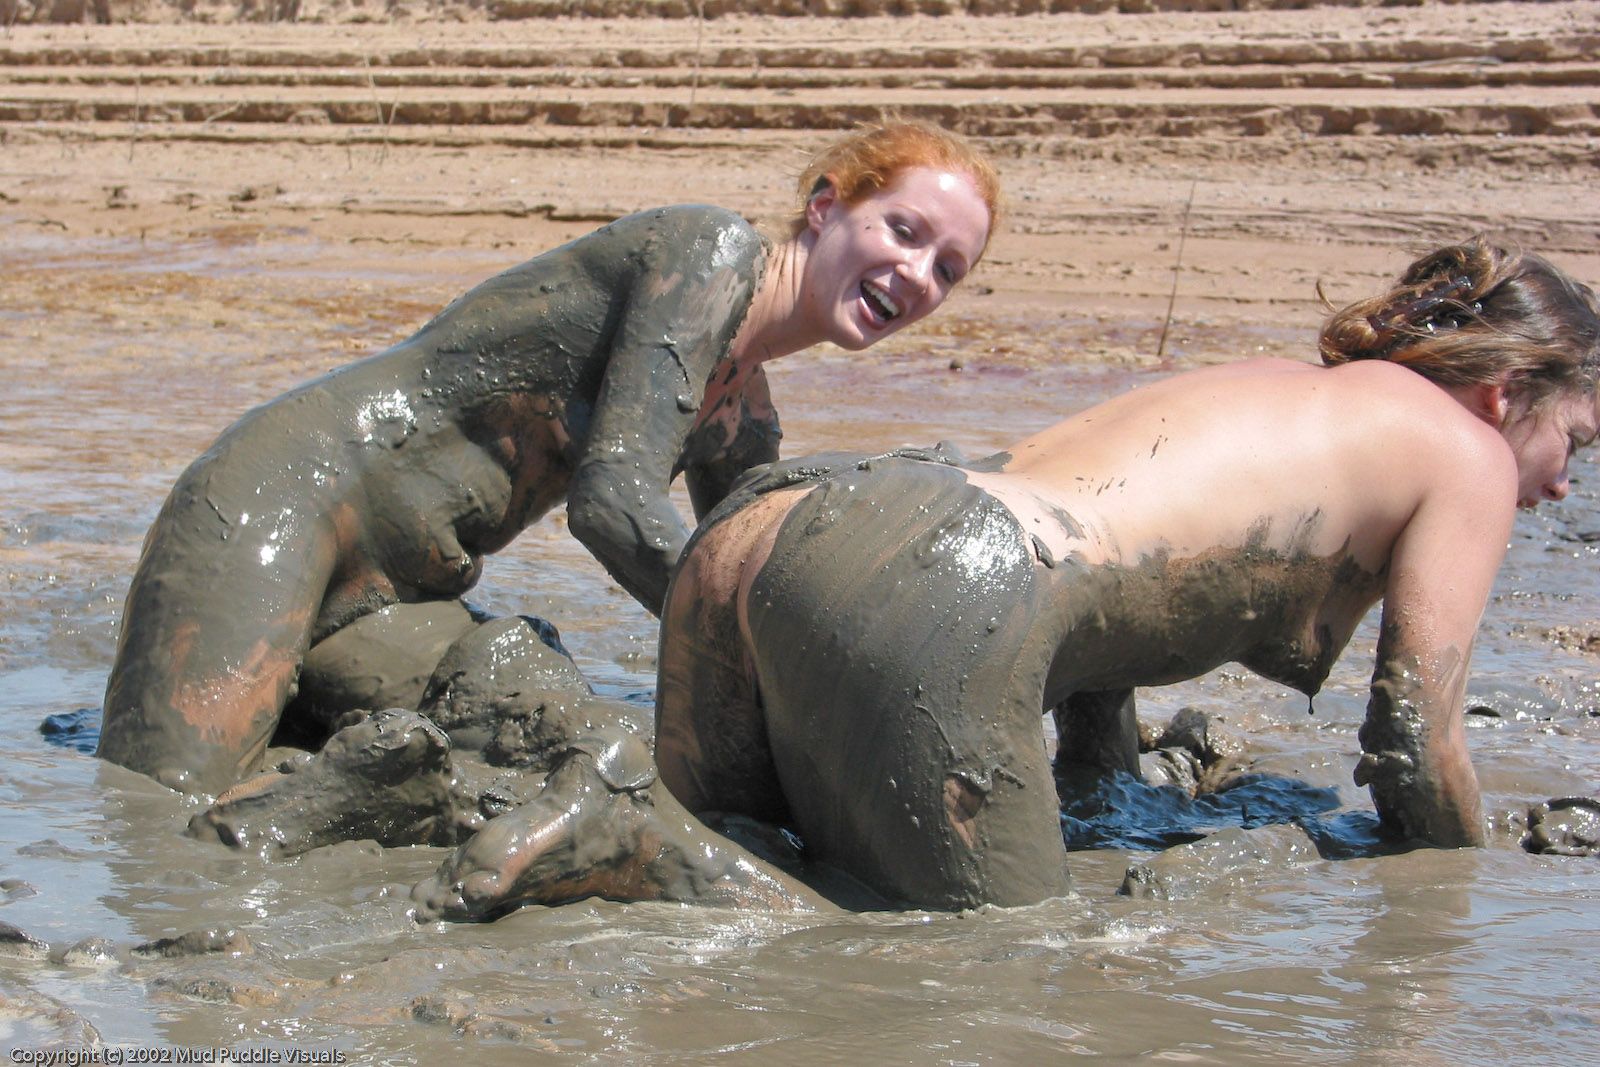 Nude Girls In The Mud